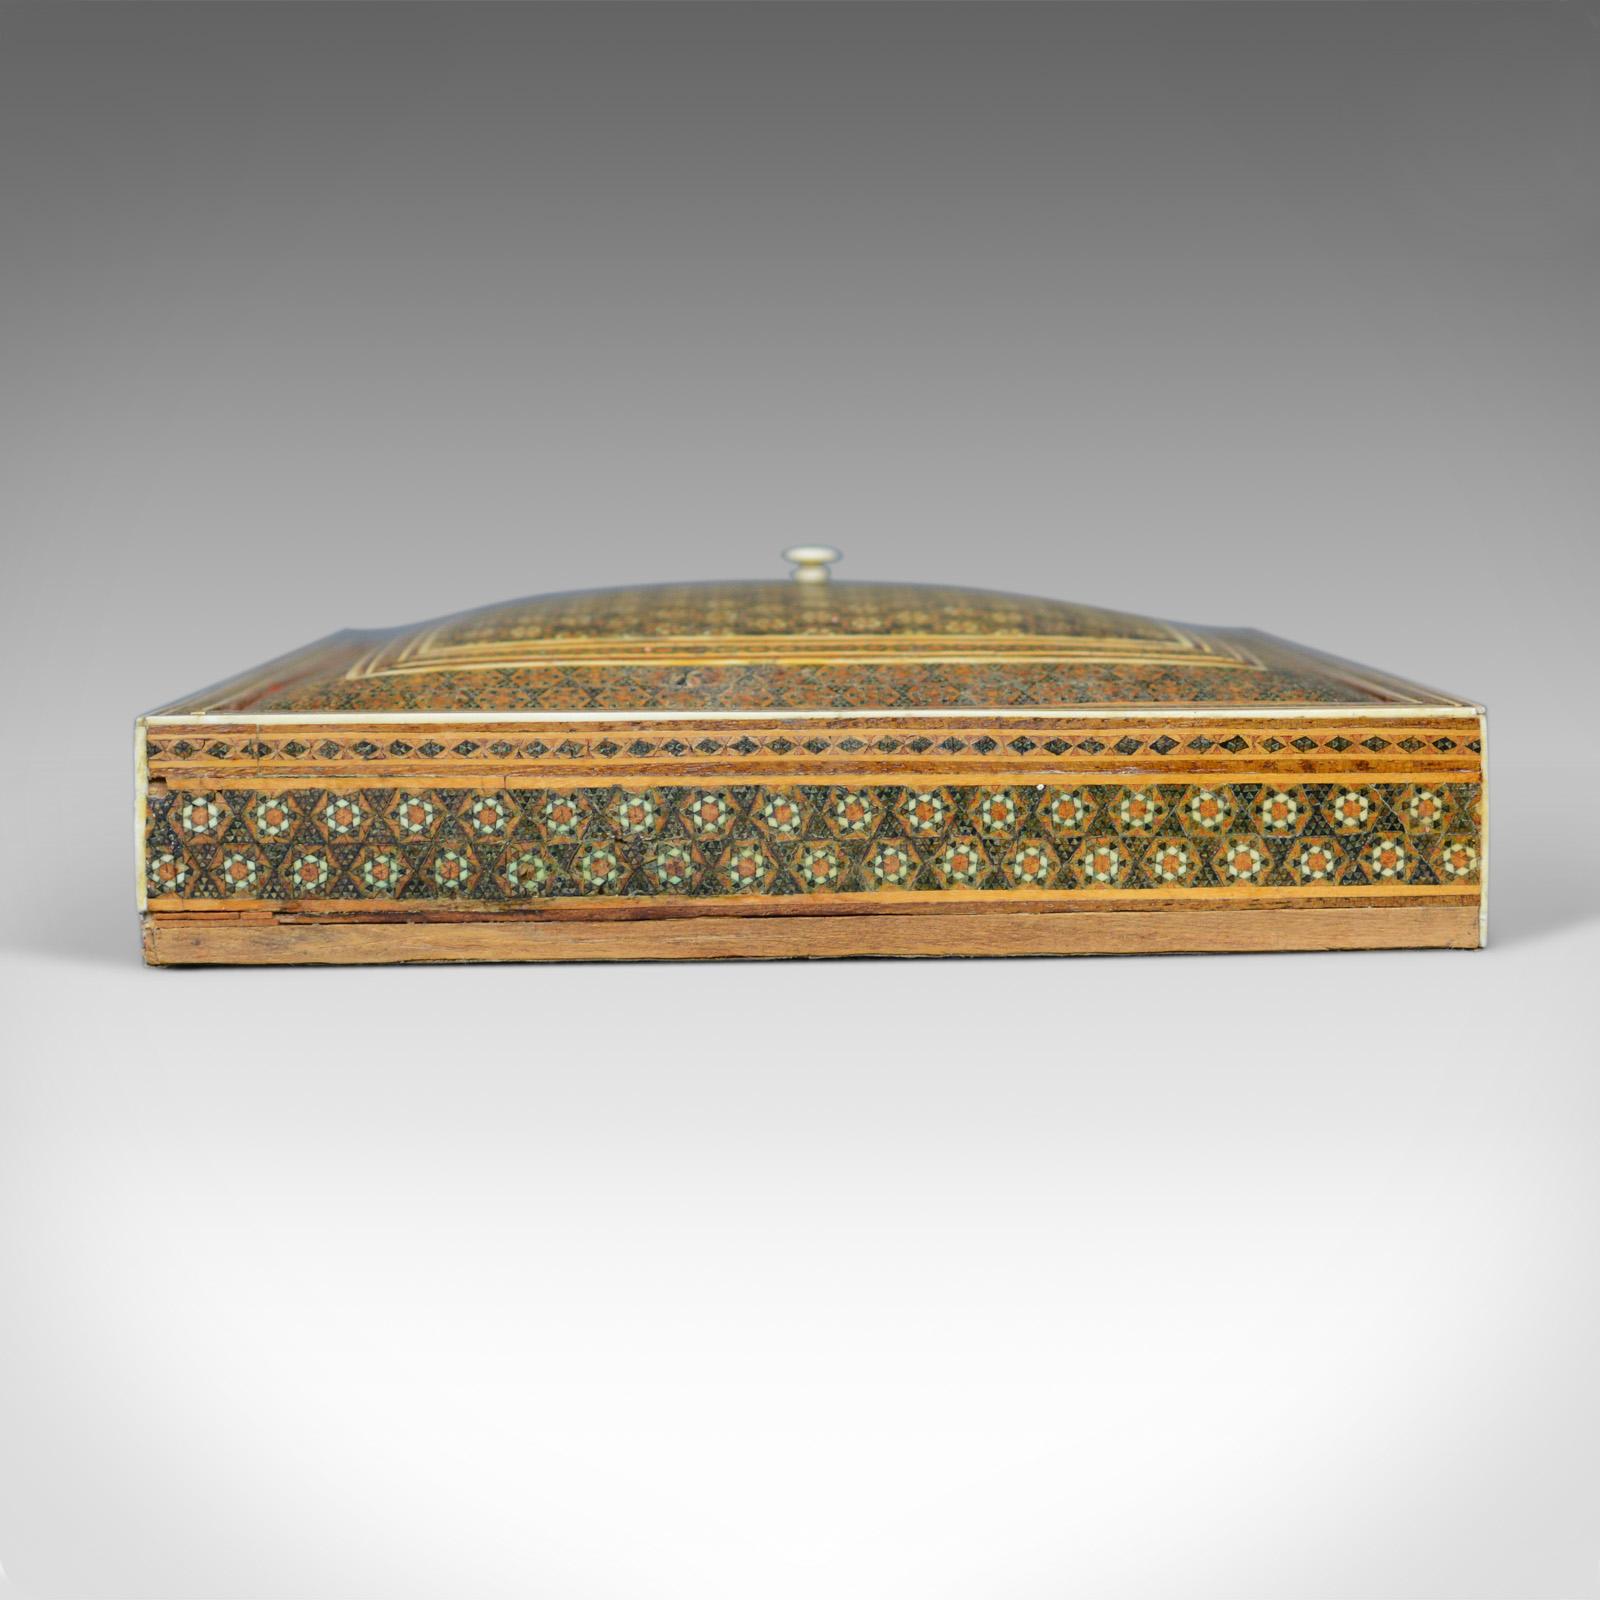 This is an antique Sadeli ware box. An Anglo-Indian jewelry box dating to the late 19th century, circa 1880.

Beautifully crafted Sadeli ware box
Intricate geometric design
In earth tones

The domed lid dressed with a turned pull
Opening to